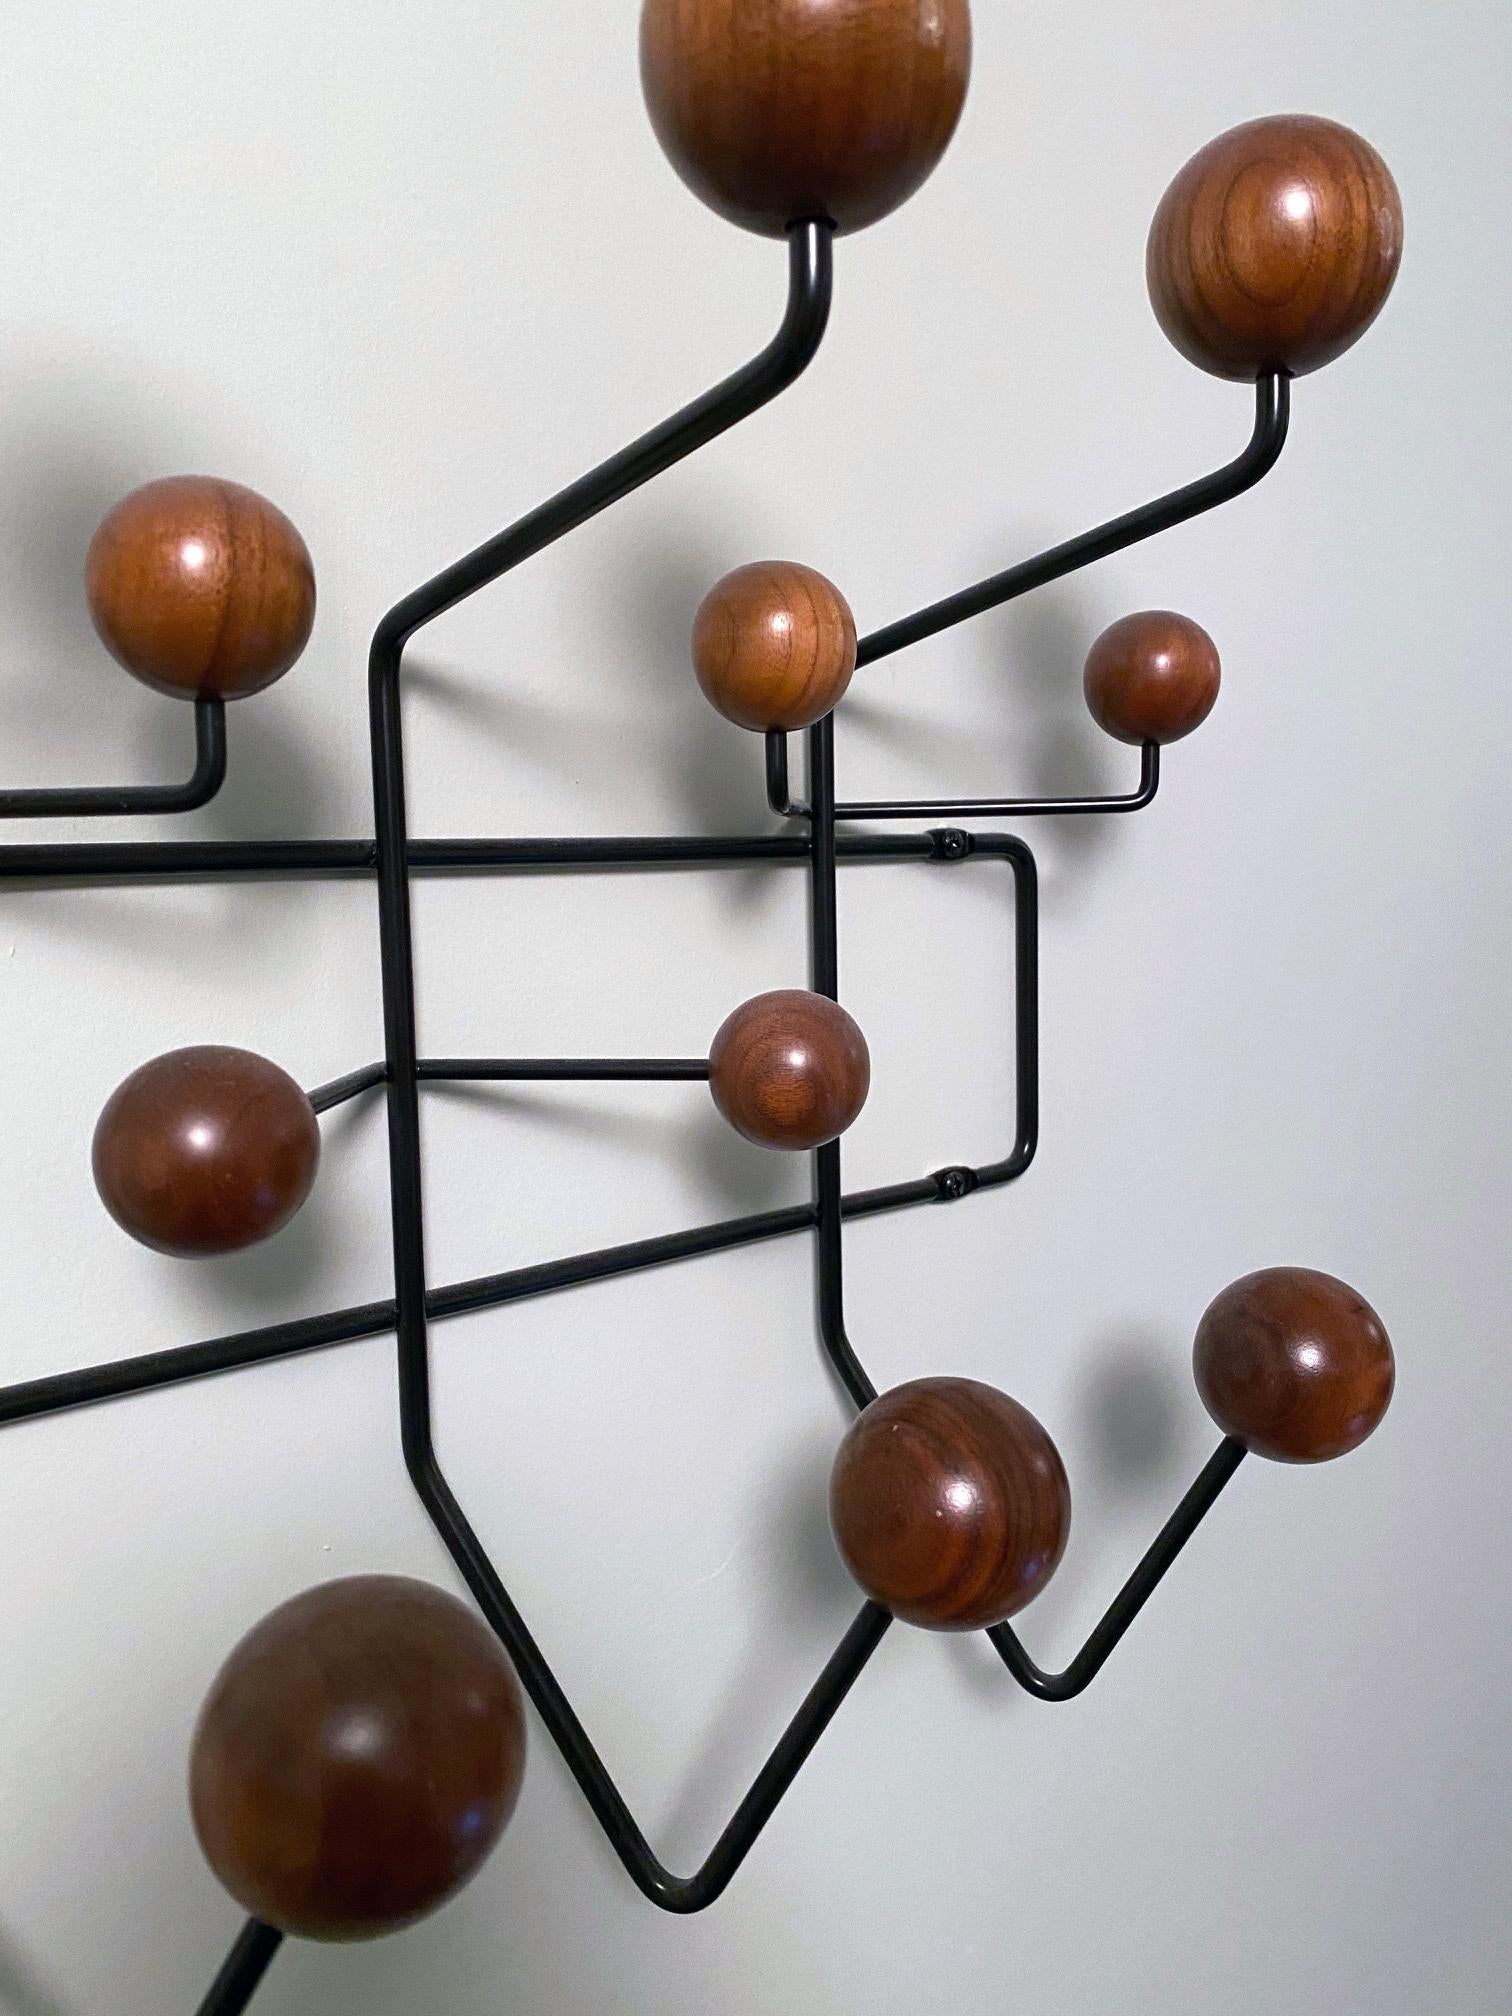 Charles and Ray Eames elevated the everyday coat rack into something fun. Originally offered with multicolored hooks and a white frame, we've added additional neutral color options to help it find a home in more places.

Eight large and six small